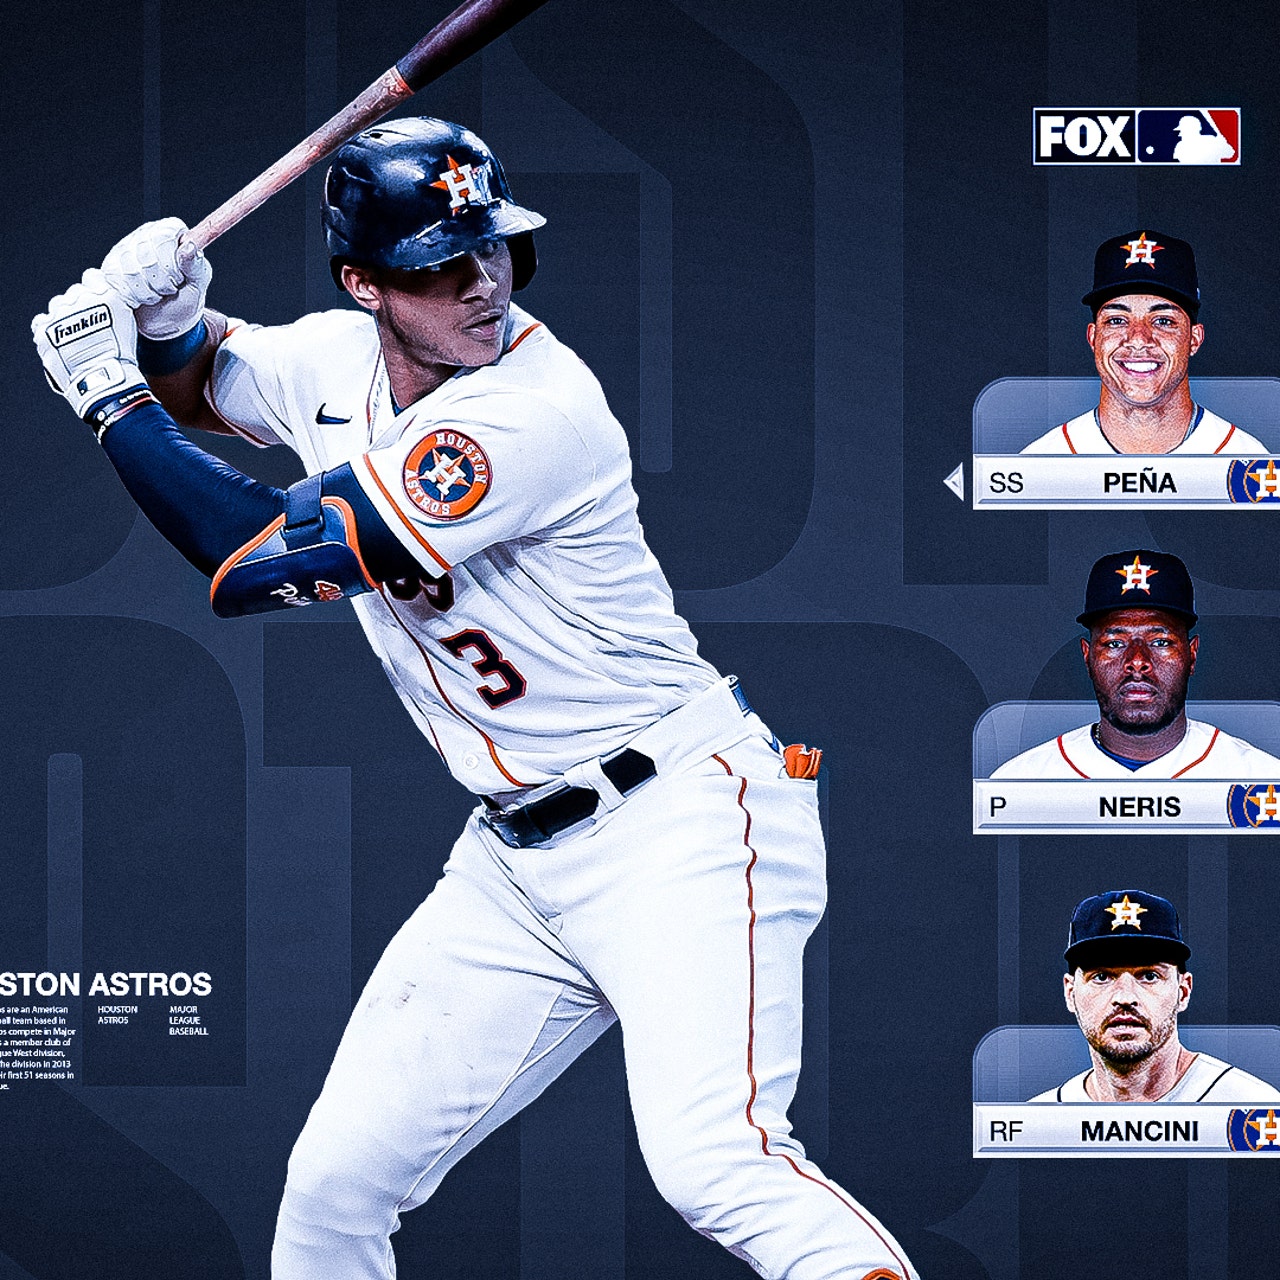 Houston Astros add new talent to usual cast of stars with Pena, Mancini,  more